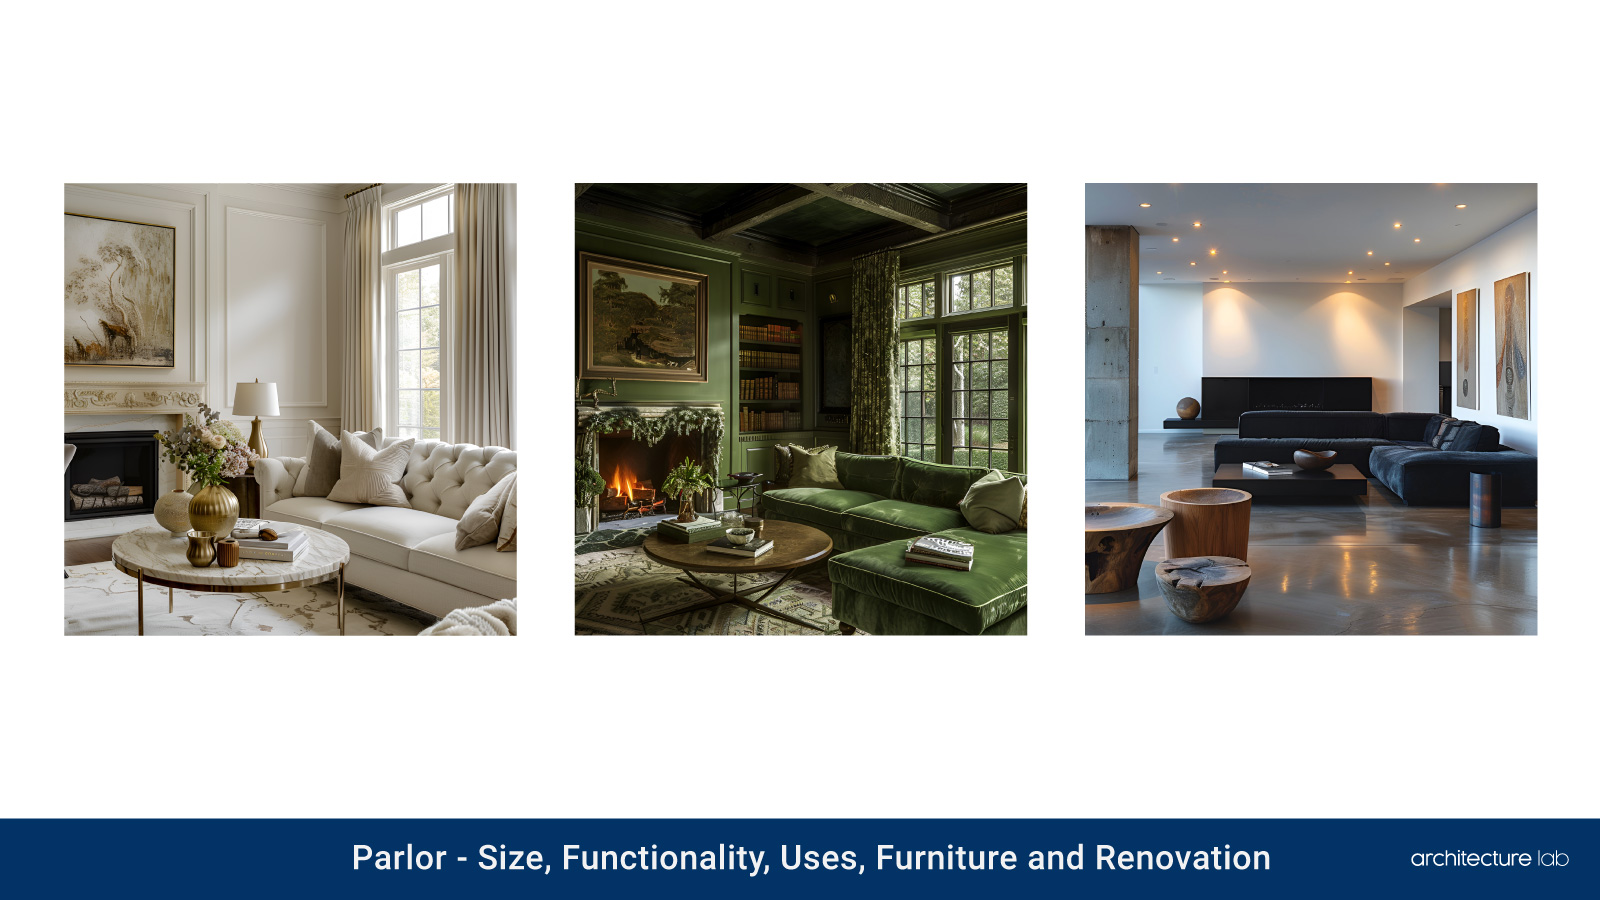 Parlor: size, functionality, uses, furniture and renovation